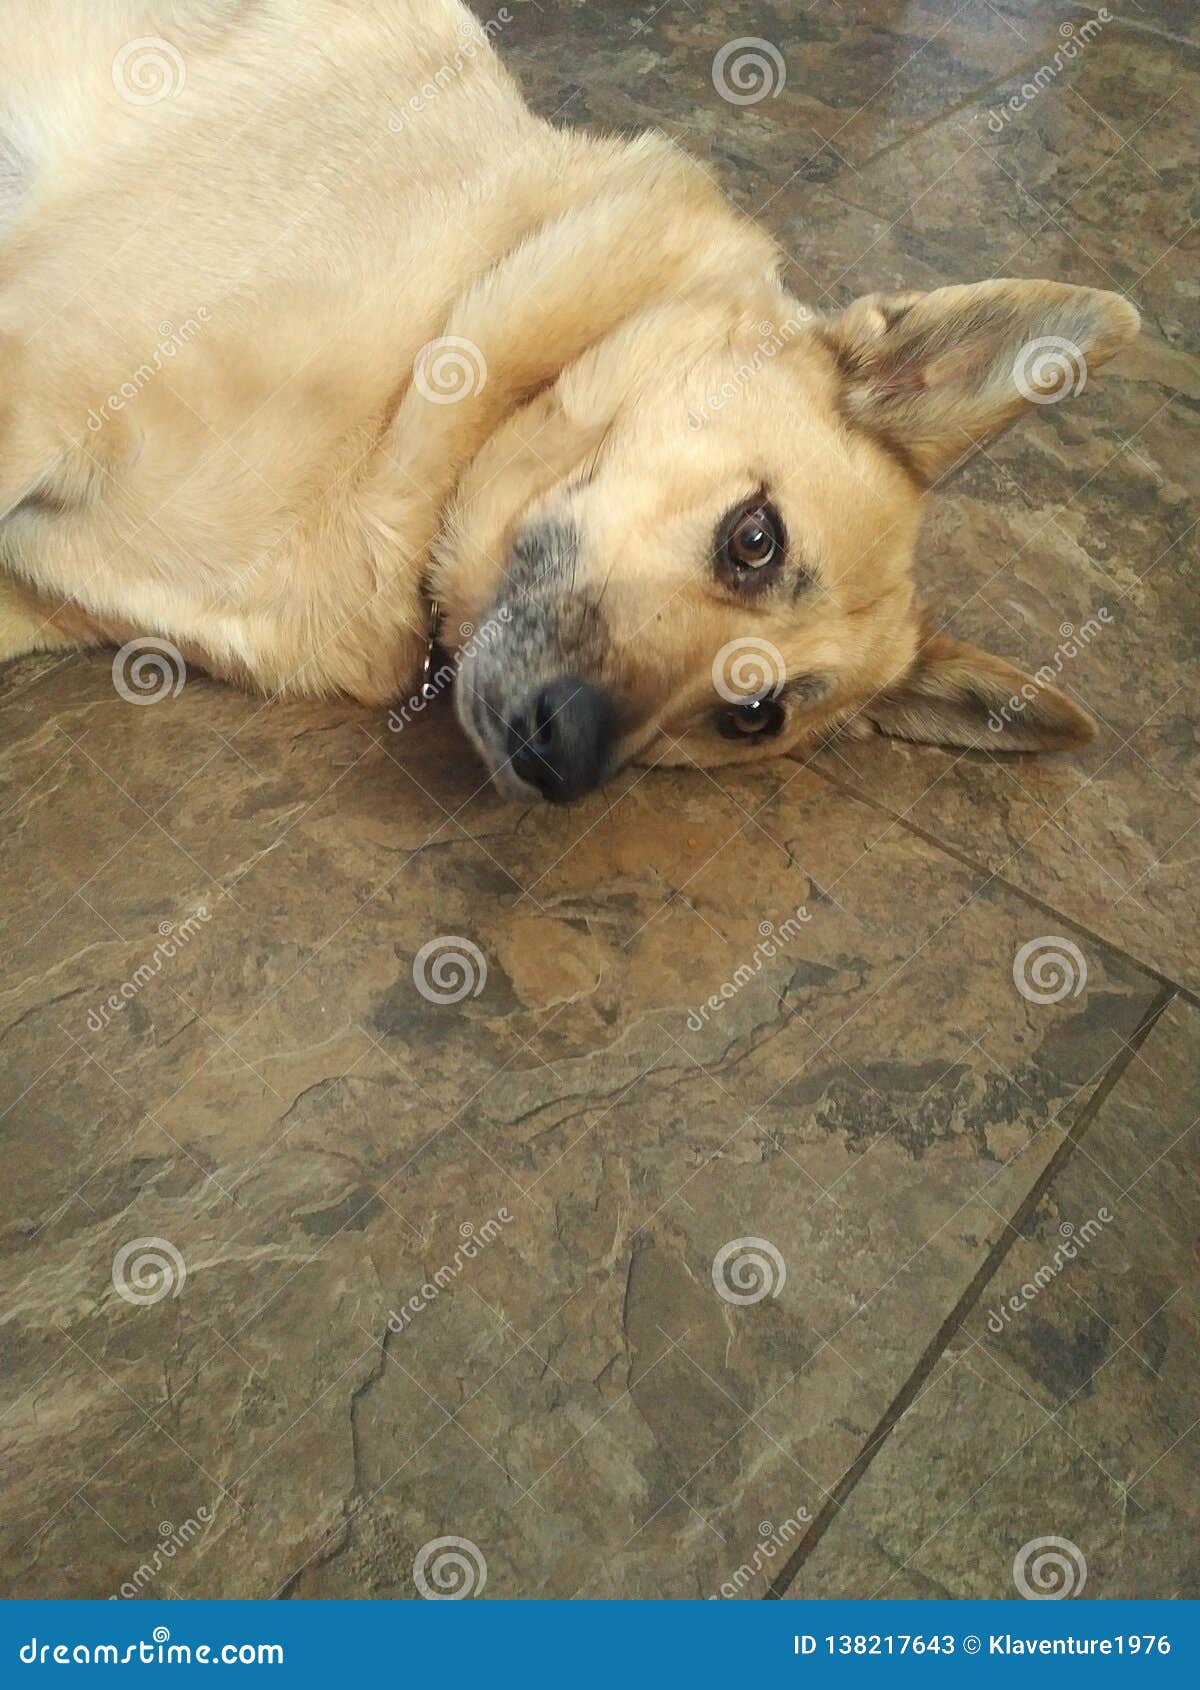 Dog laying down on floor stock image. Image of laying - 138217643